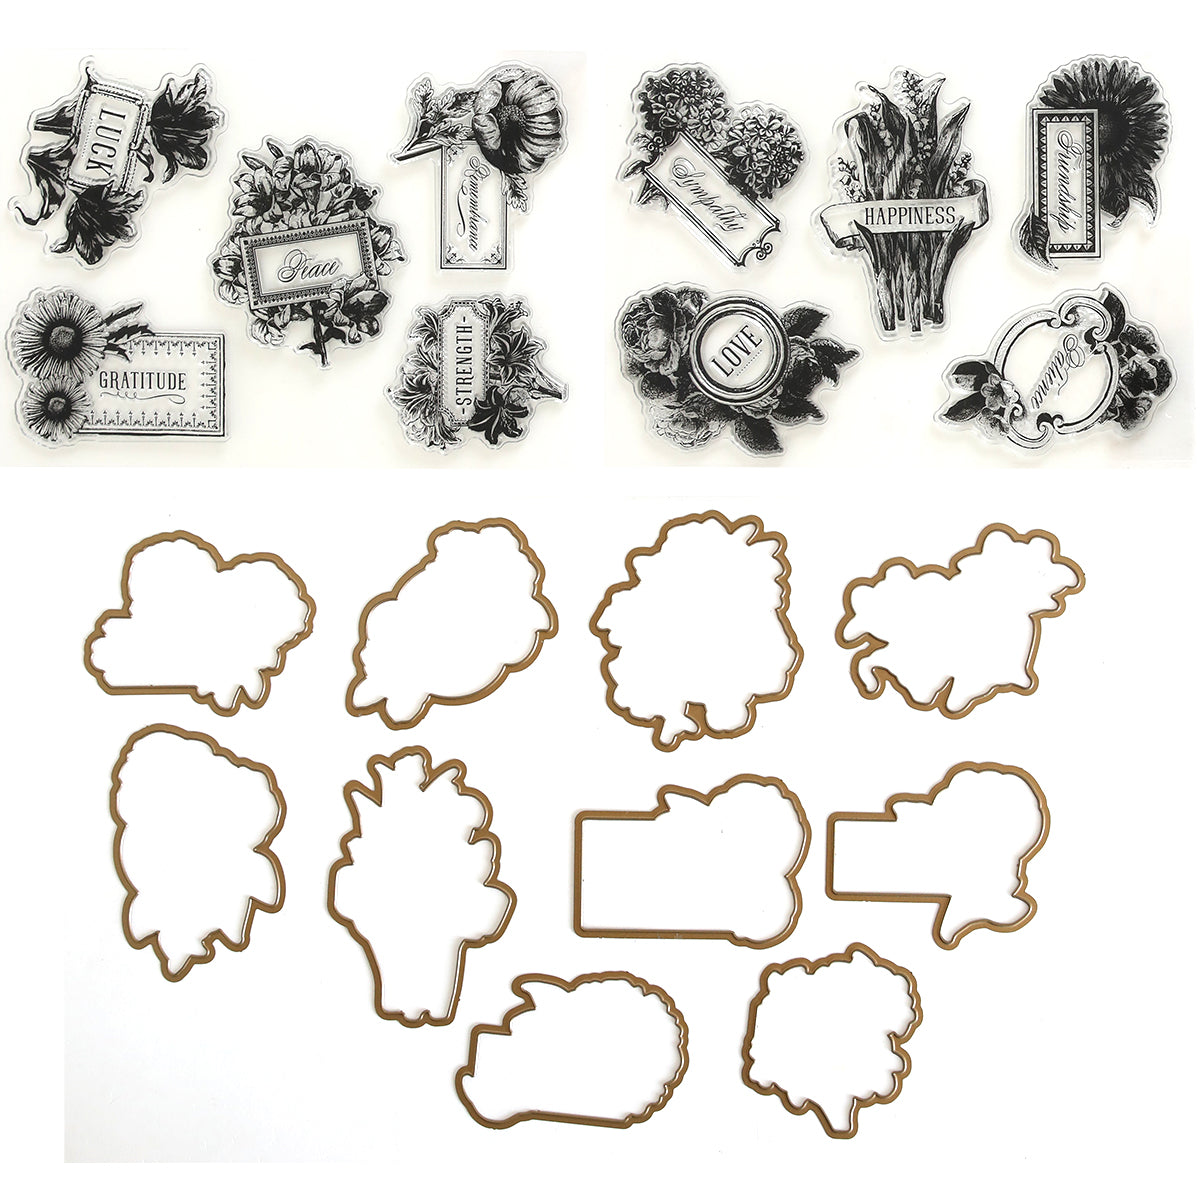 A collection of Flower Language stamps, clear stamps, and die-cut paper shapes with flowers and framed designs, some featuring words like "gratitude," "faith," and "happiness" on a white background.